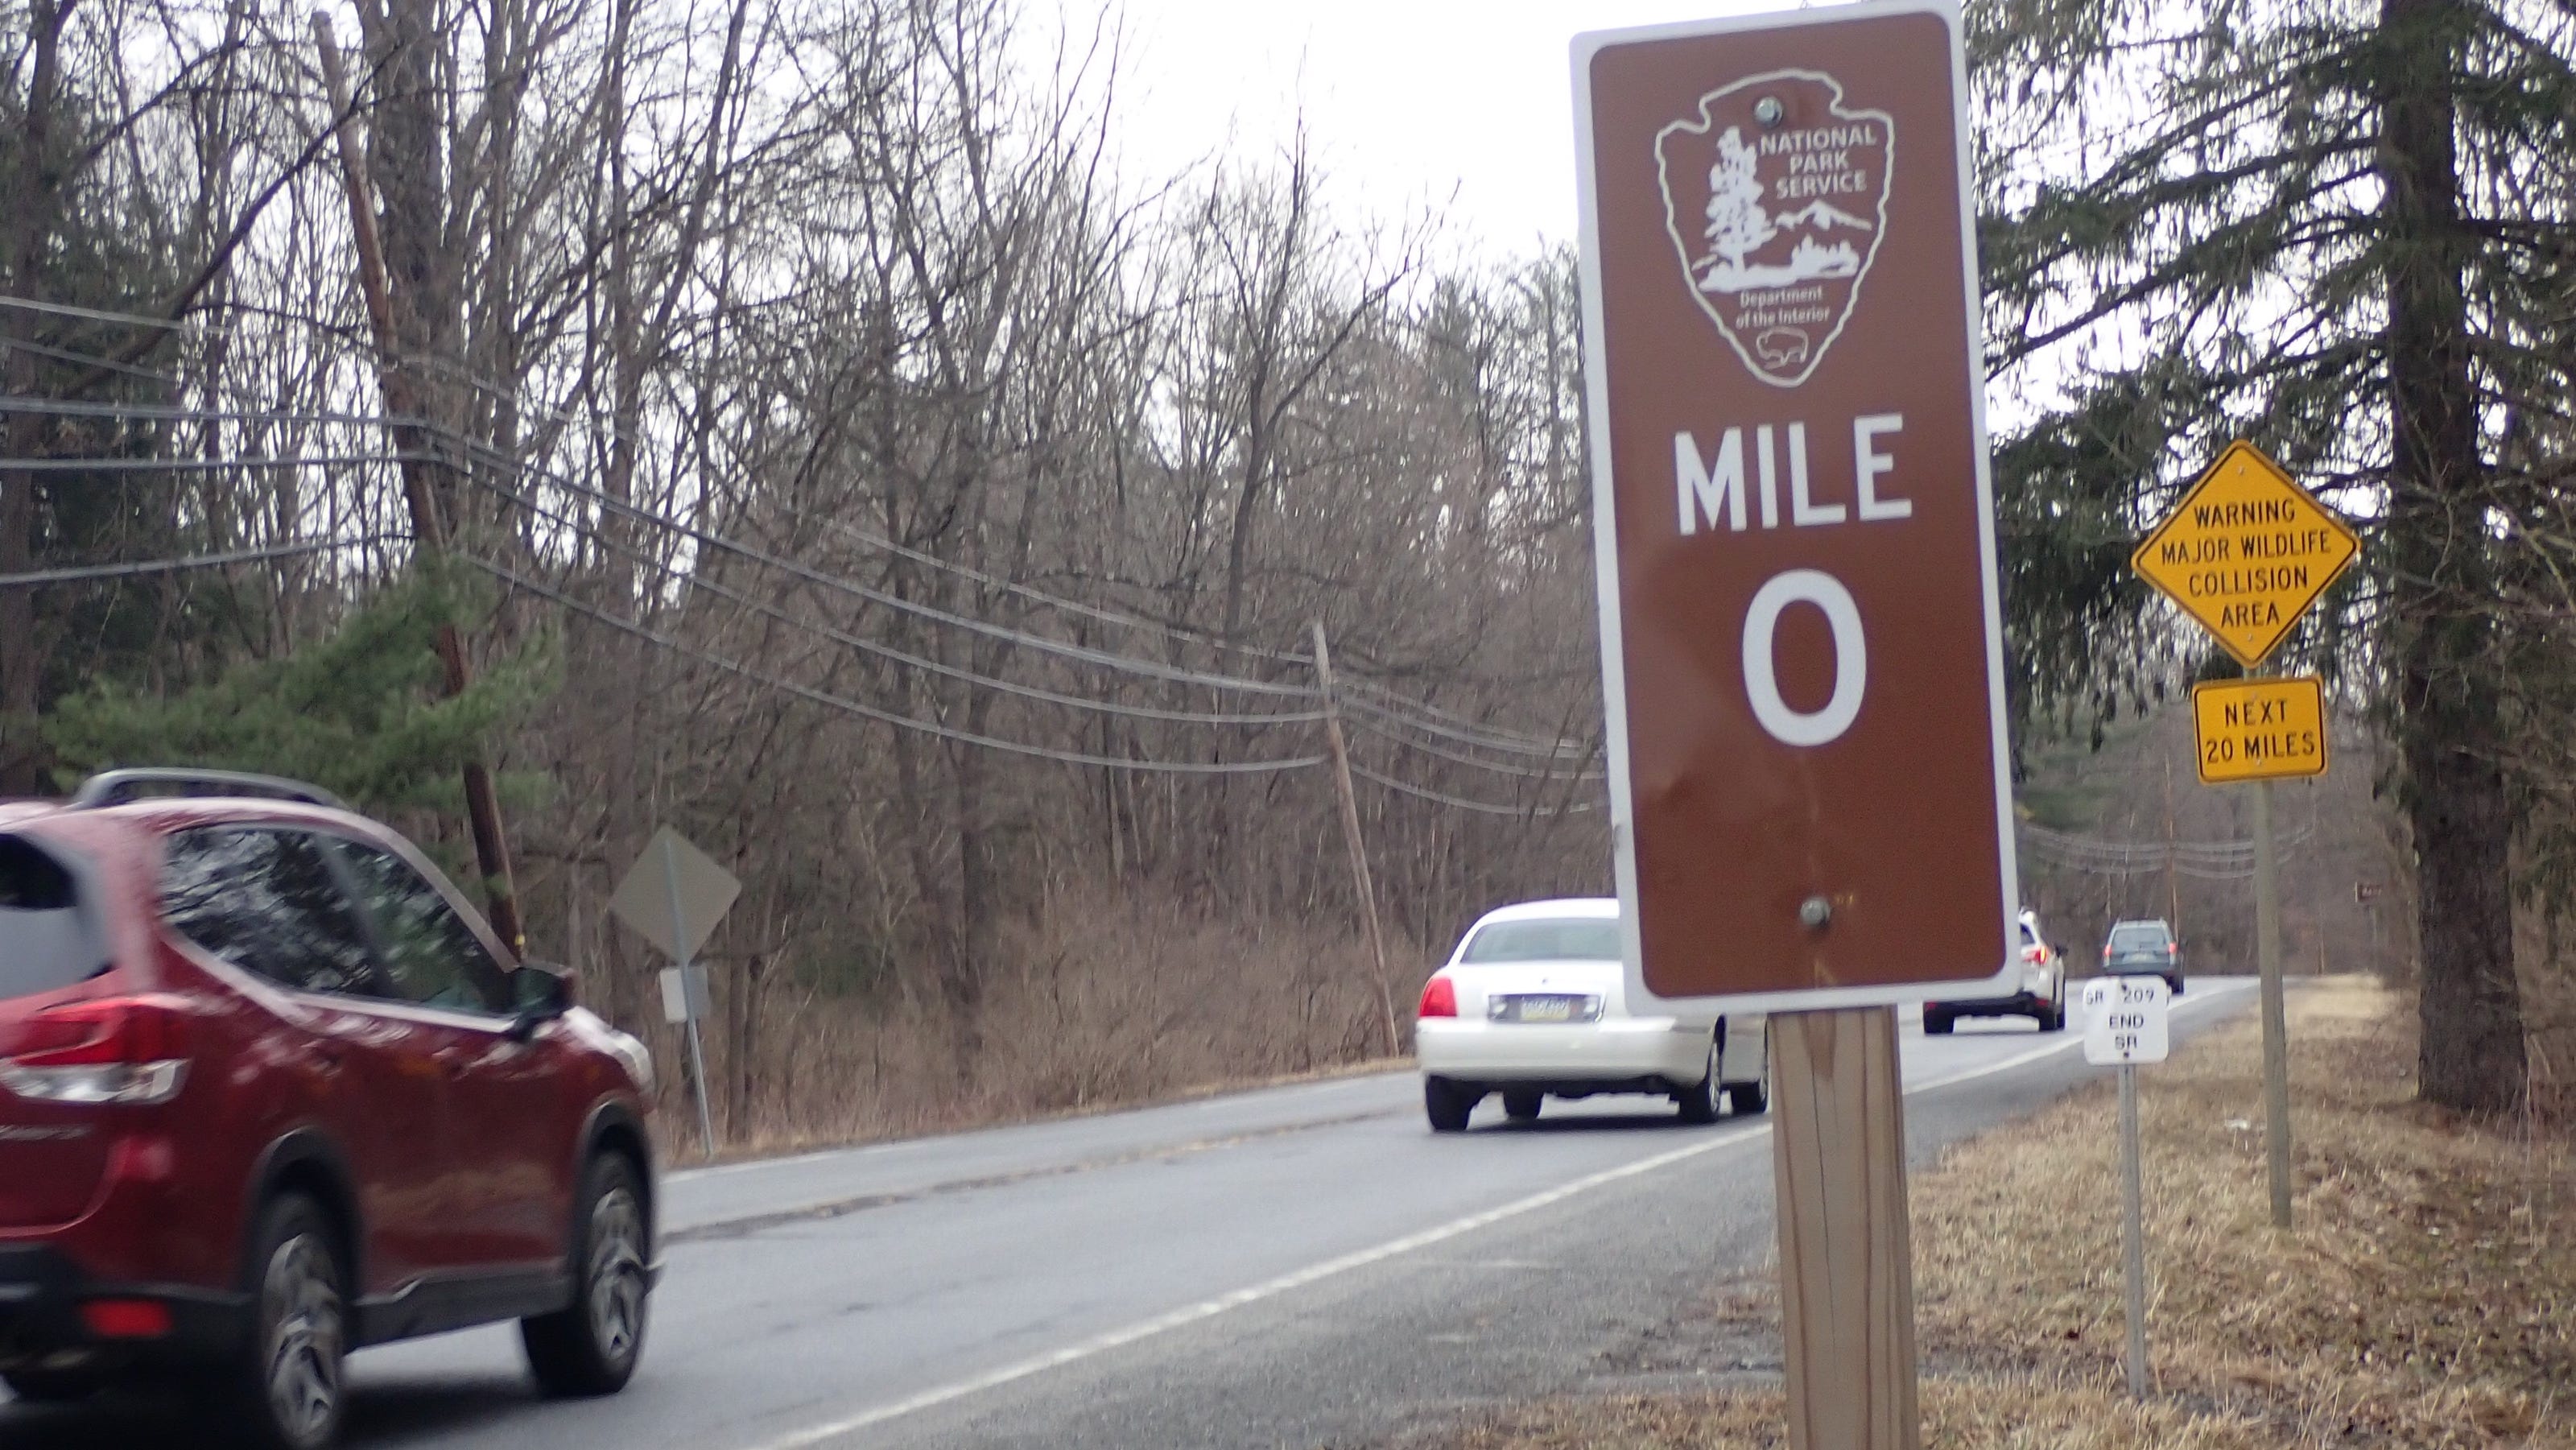  Expect delays this week as work begins on national park's Route 209 